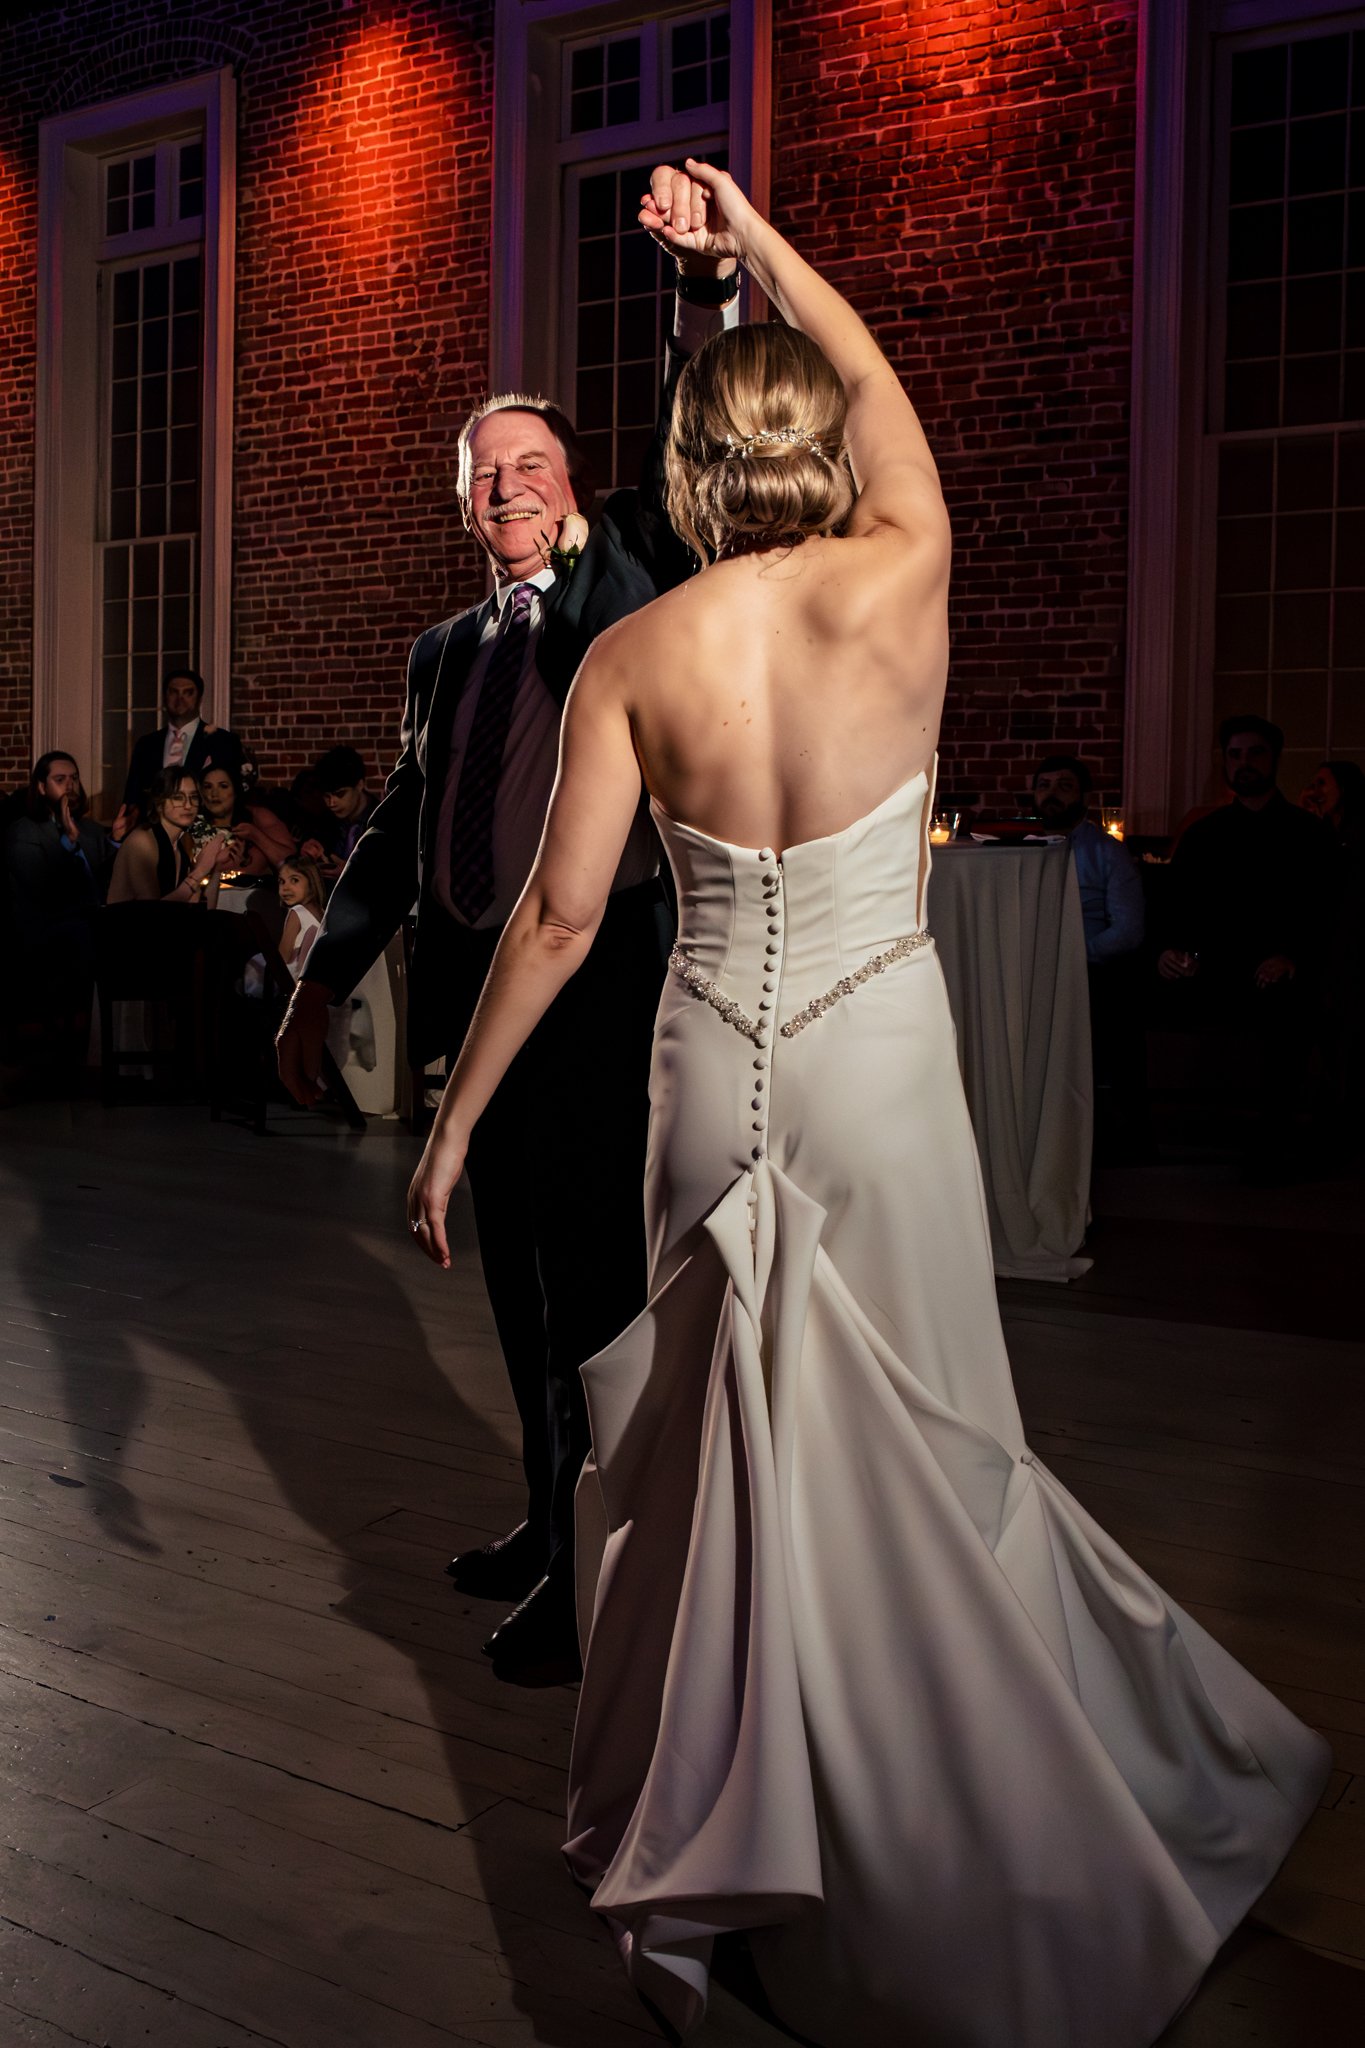 A bride and groom happily dance in front of a brick wall during their Felicity Church wedding in New Orleans.